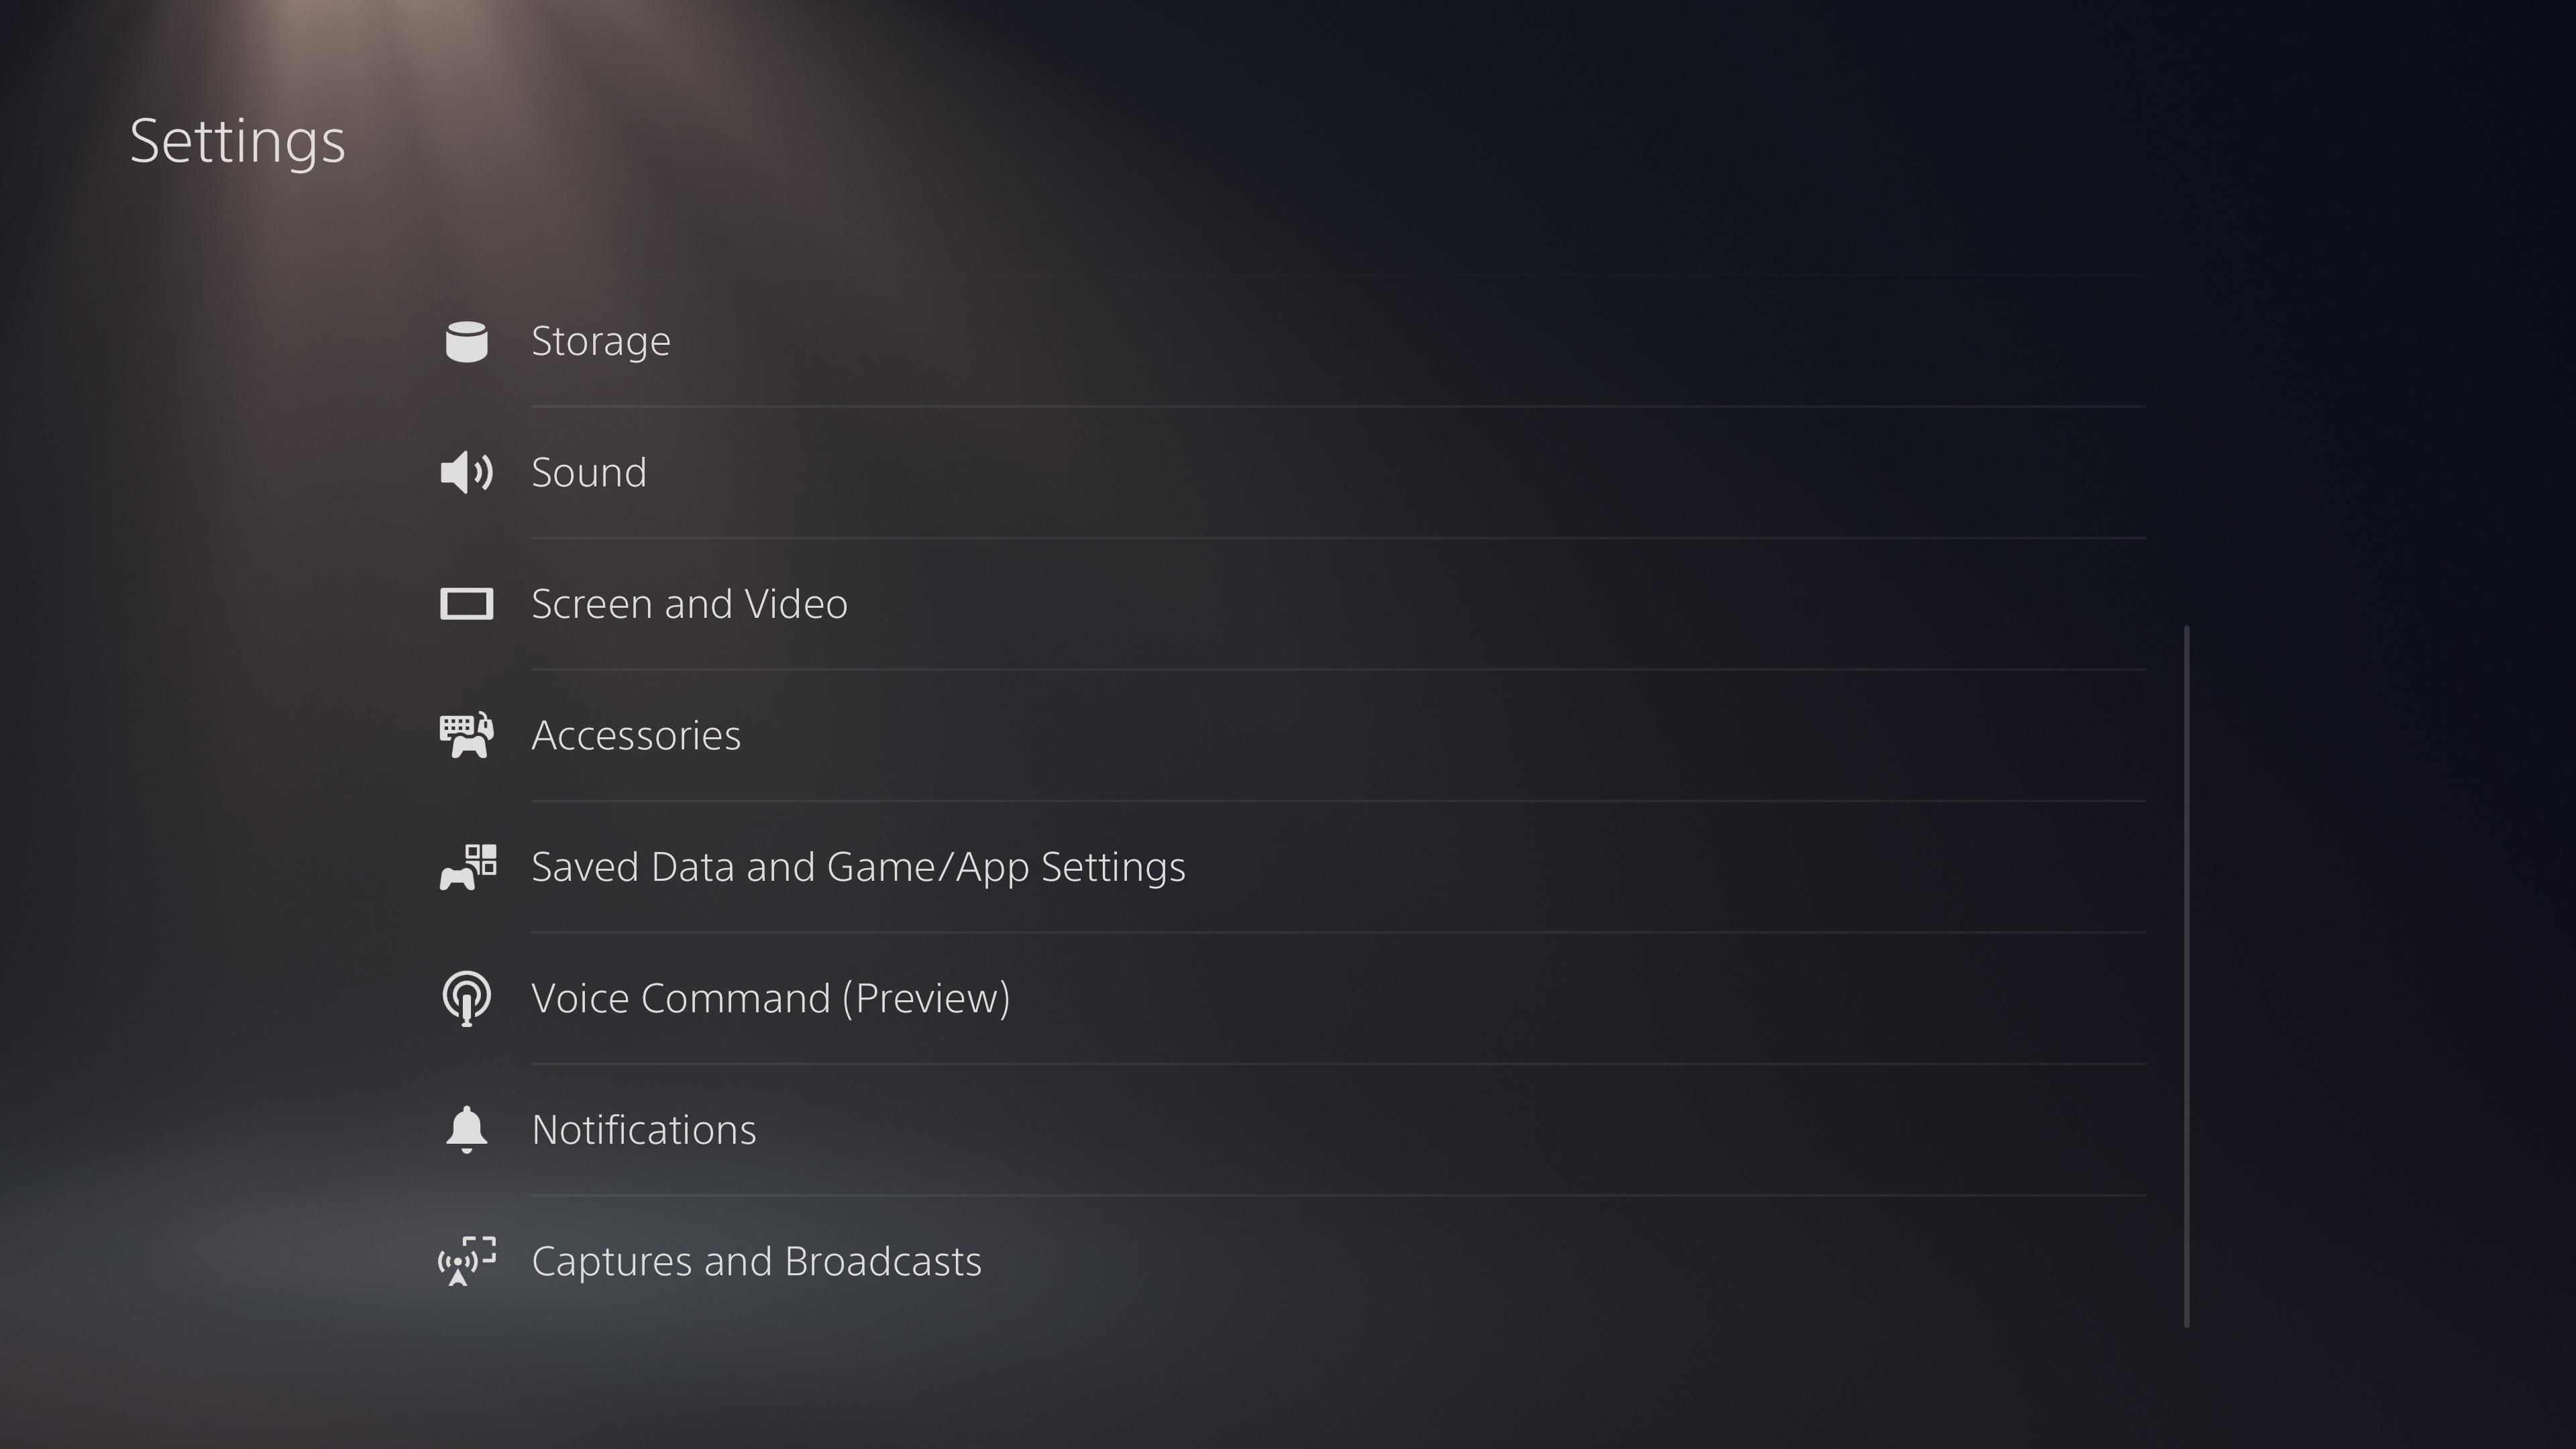 PS5 settings page